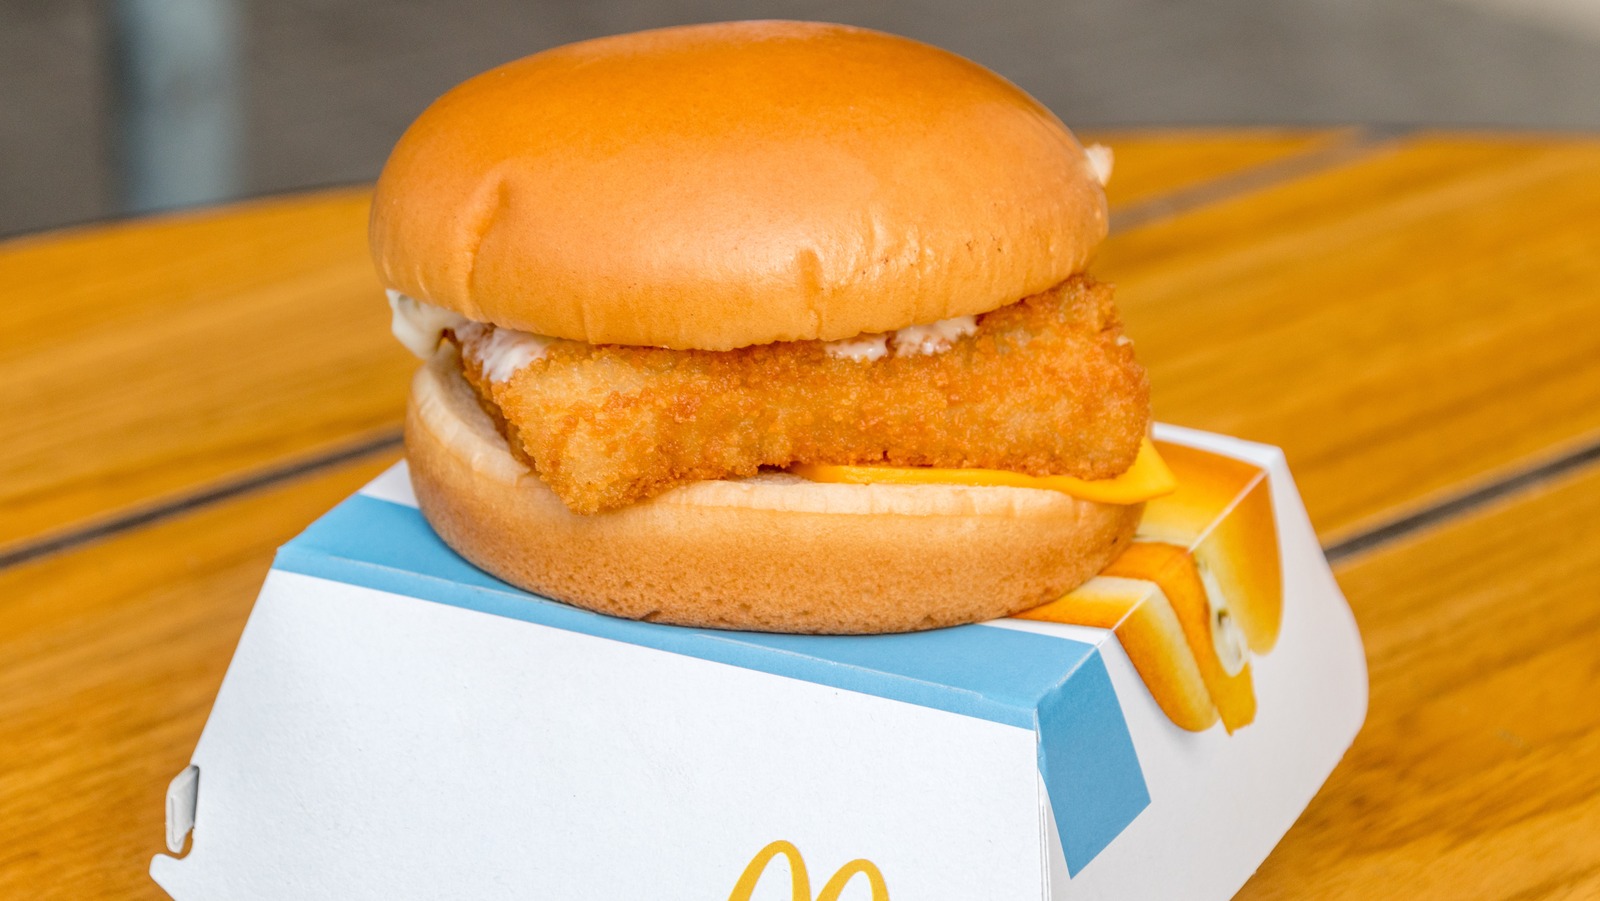 McDonald's to begin serving 'surf and turf' and other menu hacks 